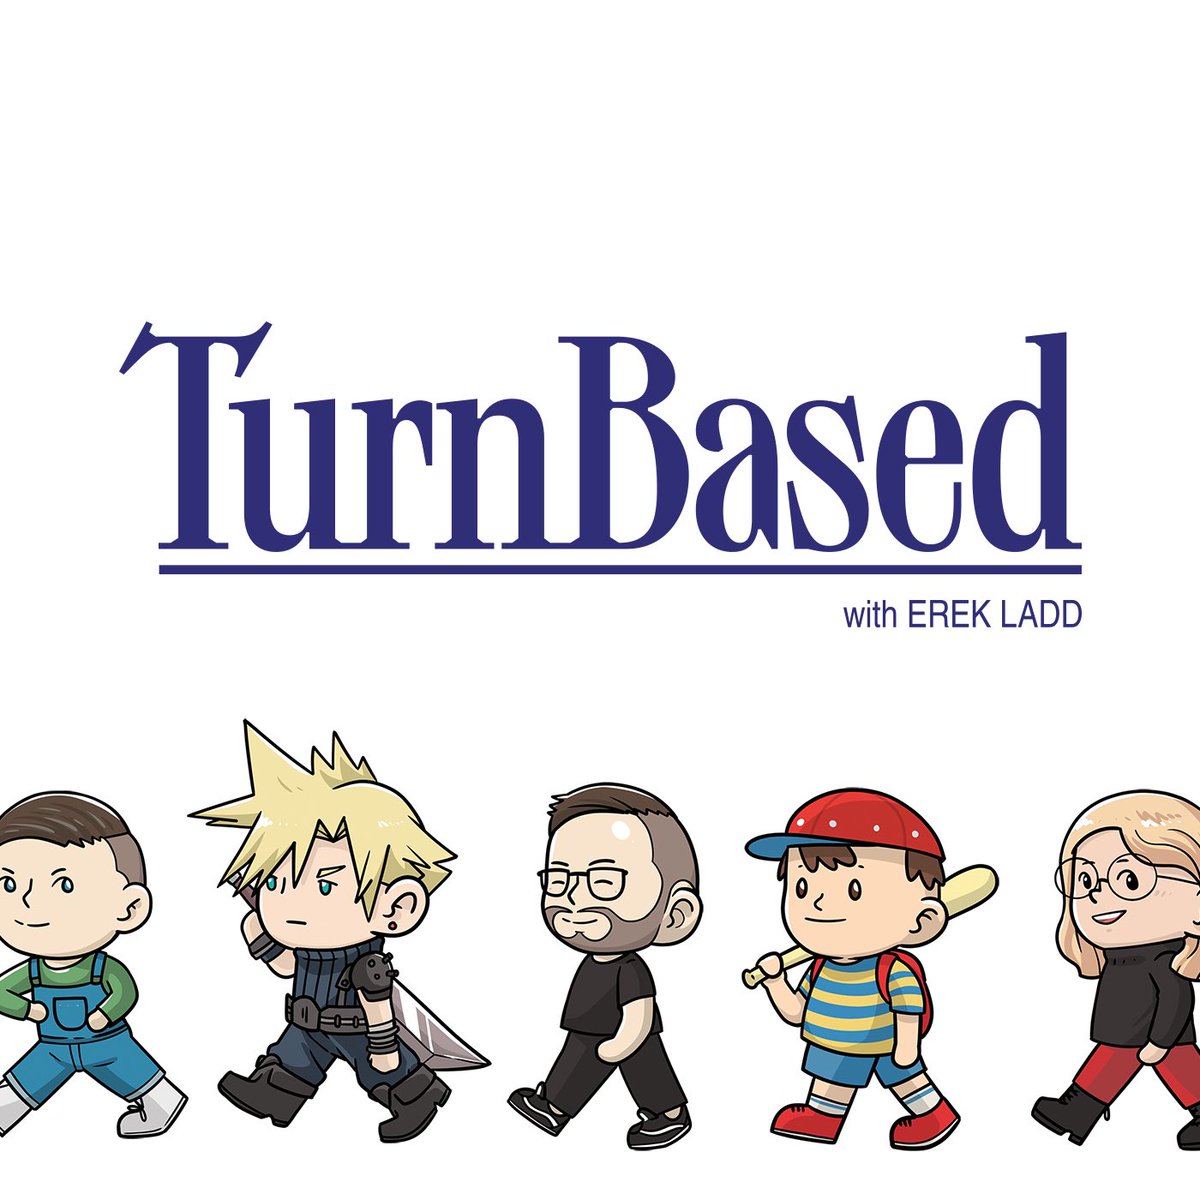 So happy to announce my BRAND NEW podcast called Turn Based! Dedicated to JRPGs - RPGs, life and the experiences that go along with it. Here we celebrate the games we love, the people that create them and the people that play them. Listen & watch weekly 🎧 Links in reply 👇🏻